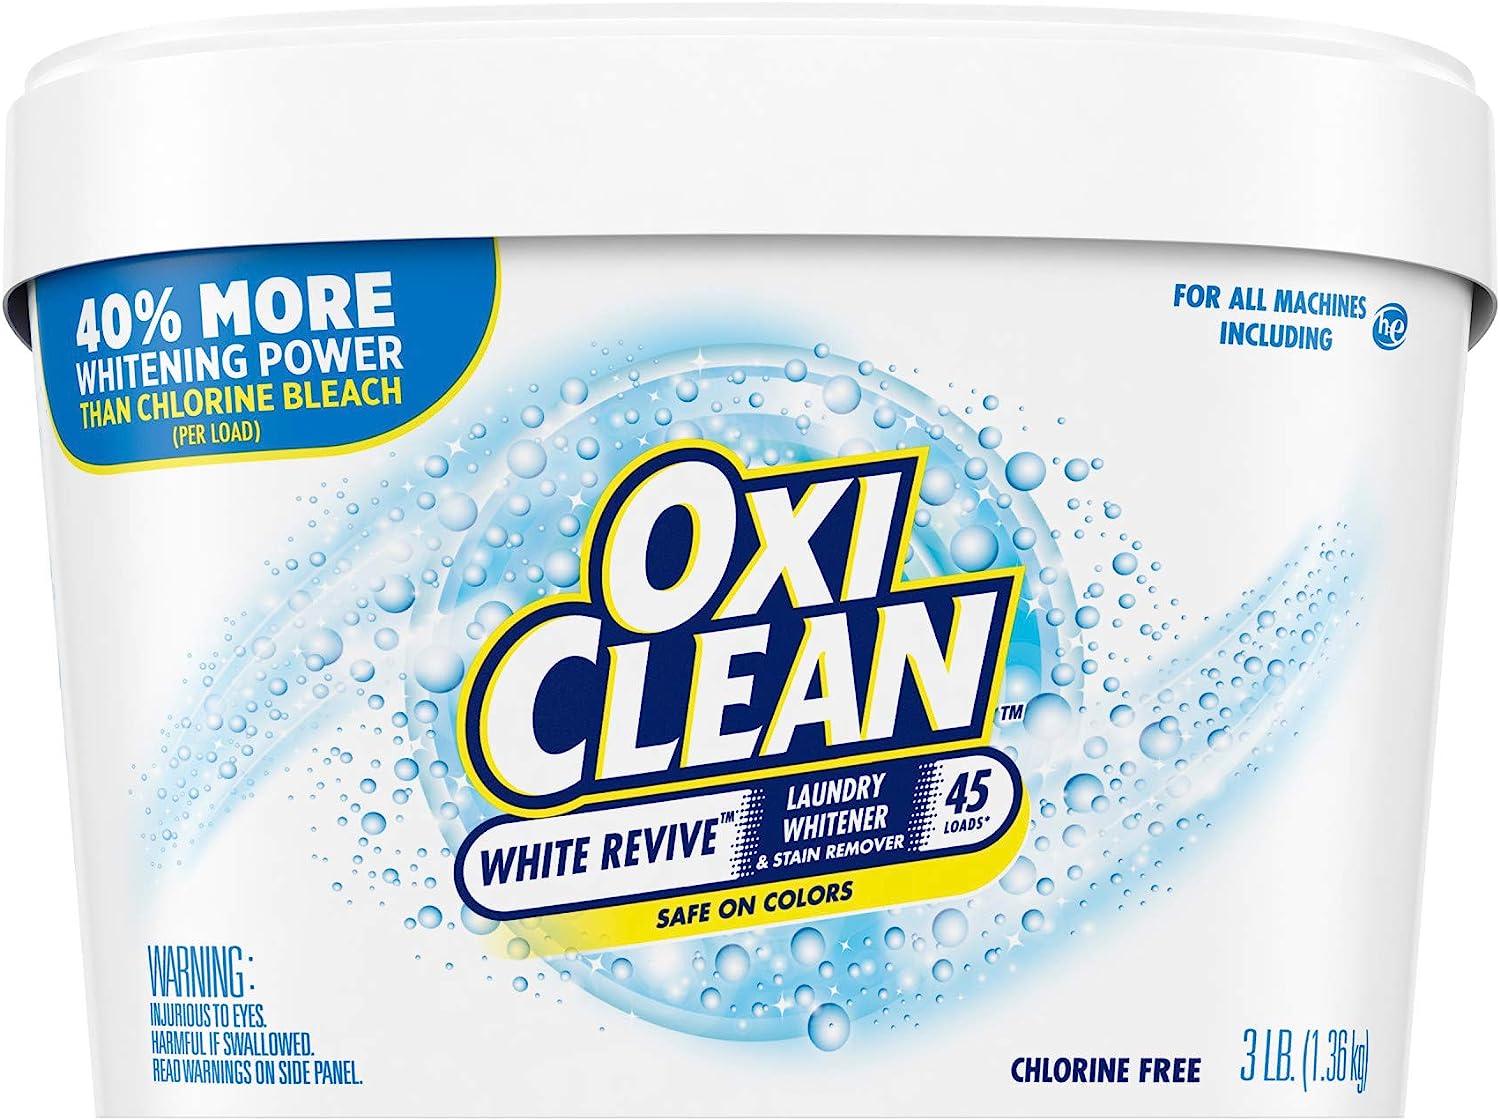 OxiClean White Revive Laundry Whitener + Stain Remover [...]